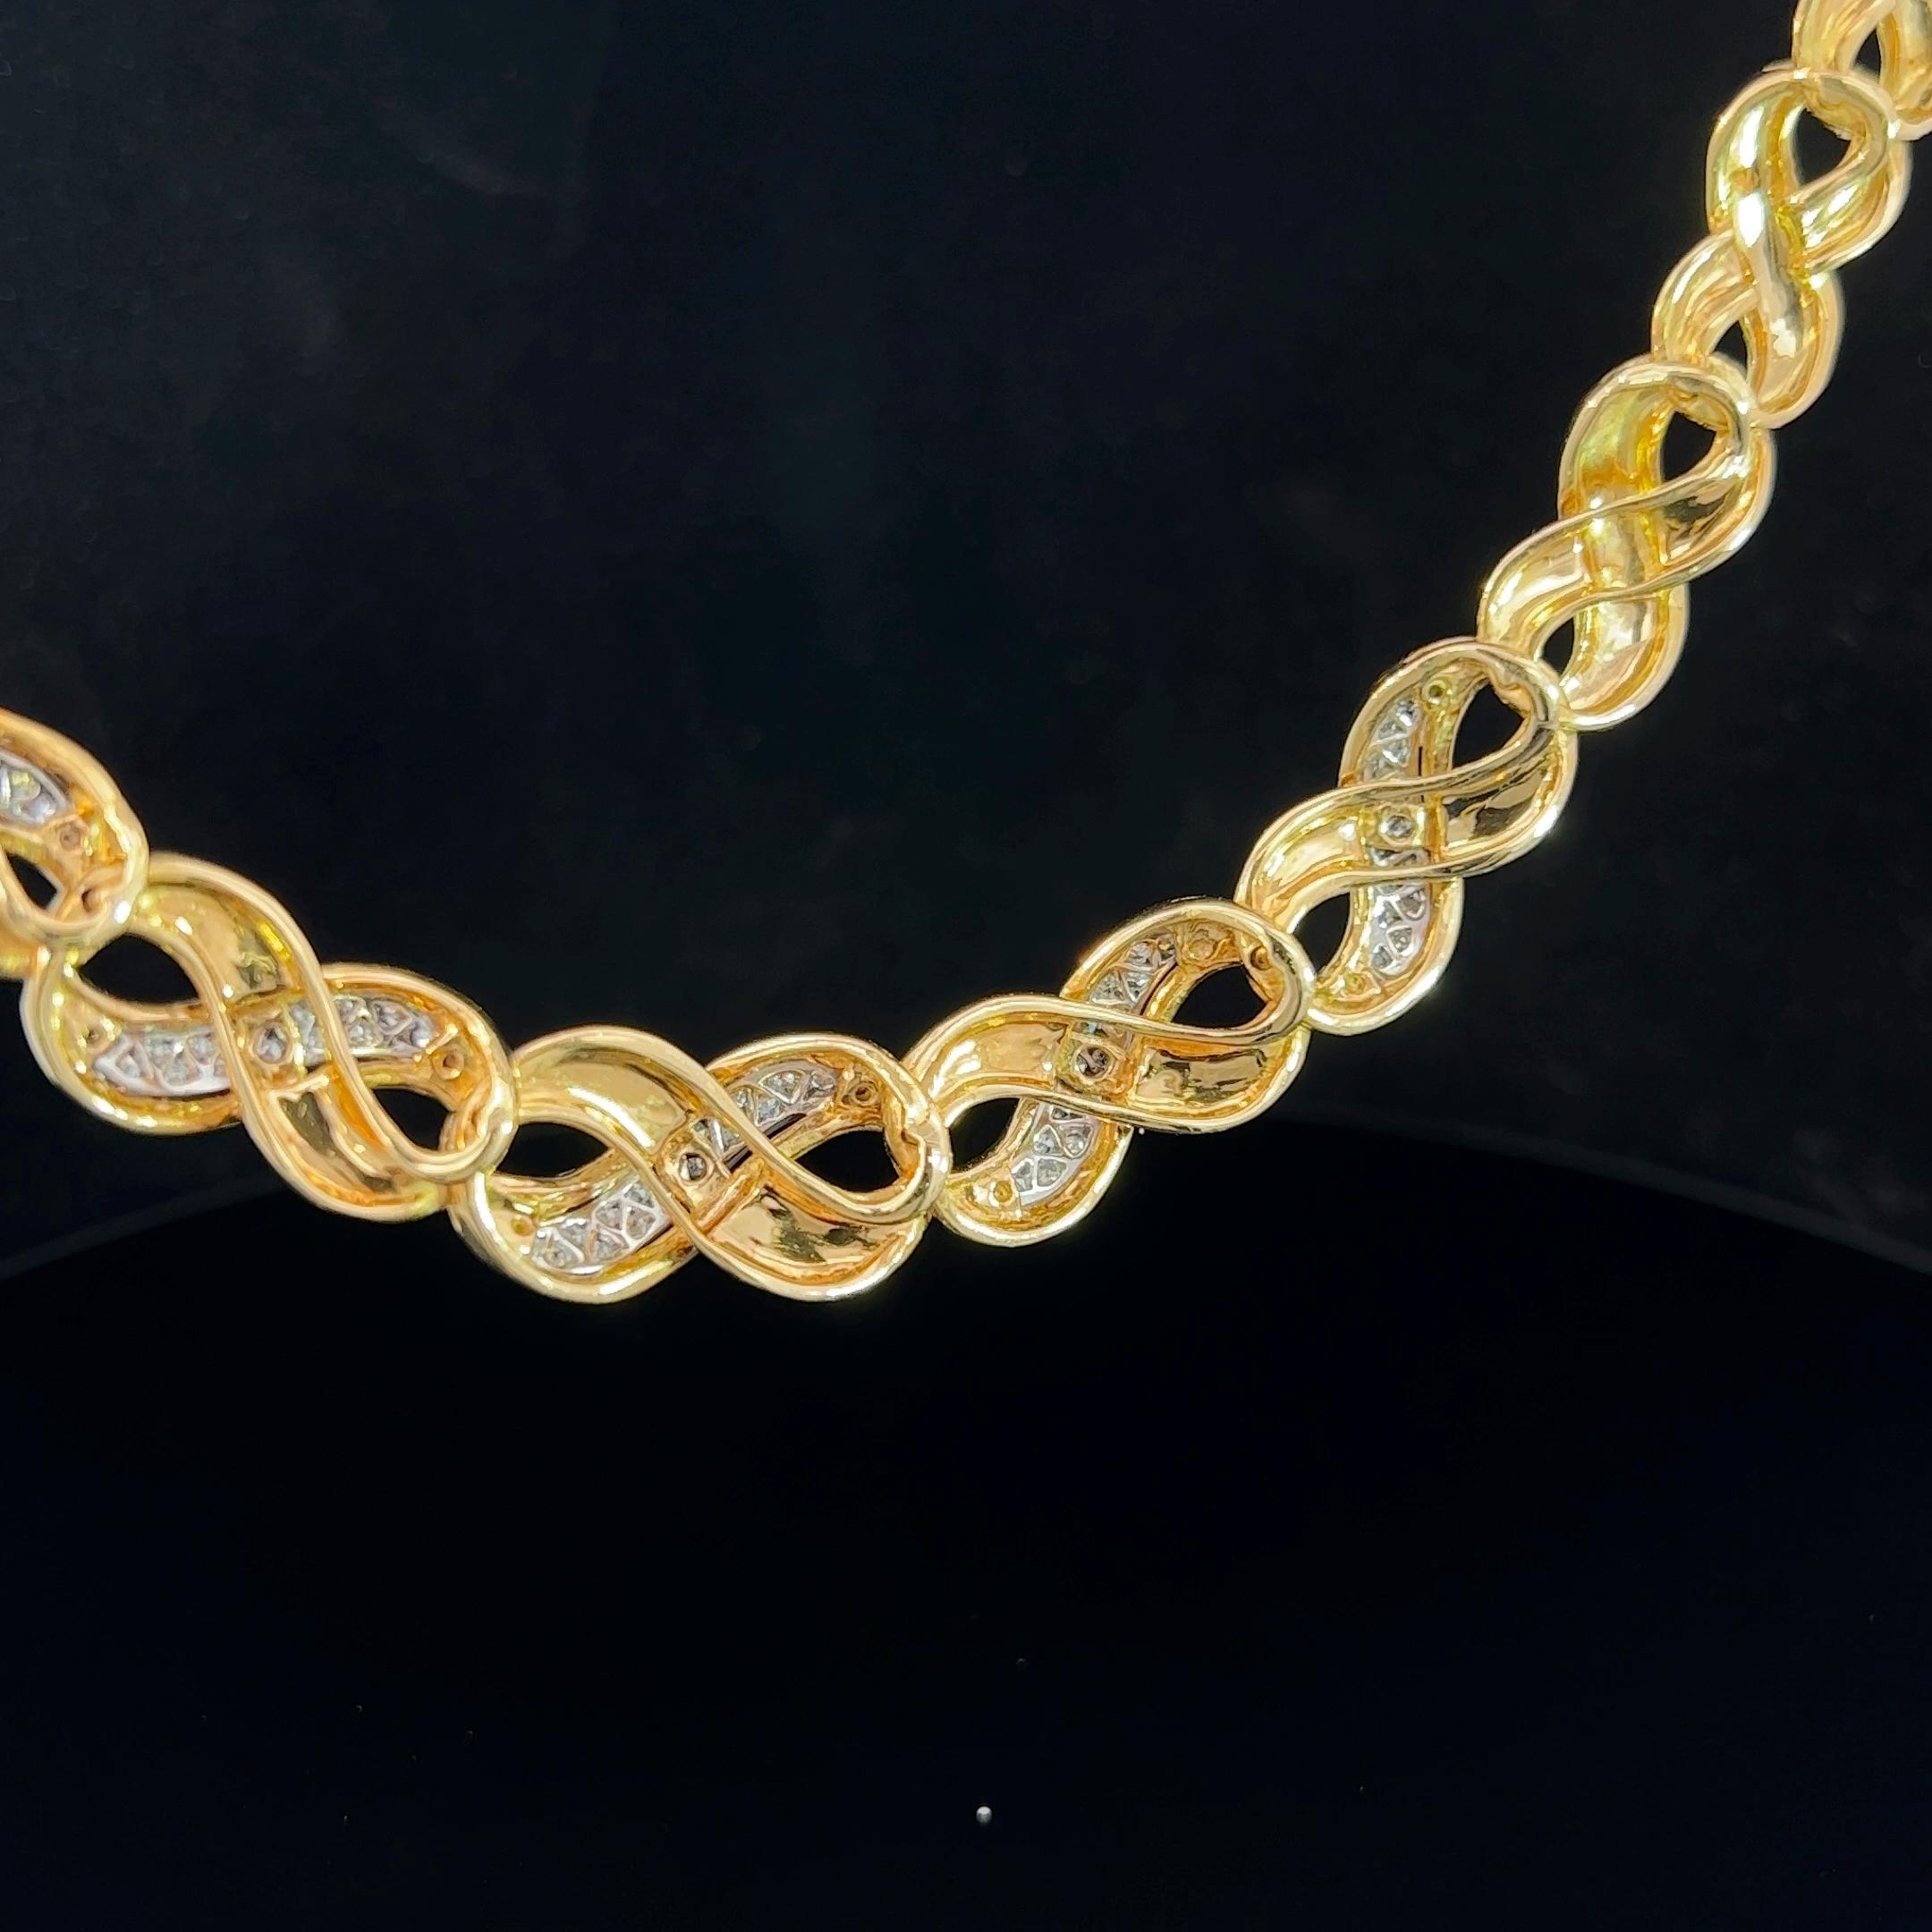 Statement collar crafted in 18k yellow gold and pave set with diamonds. This necklet consists of a tapered series of figure eight, the infinity symbol gold links. The links measure 9.6mm to 12.8mm wide. This necklet is possibly Italian made with